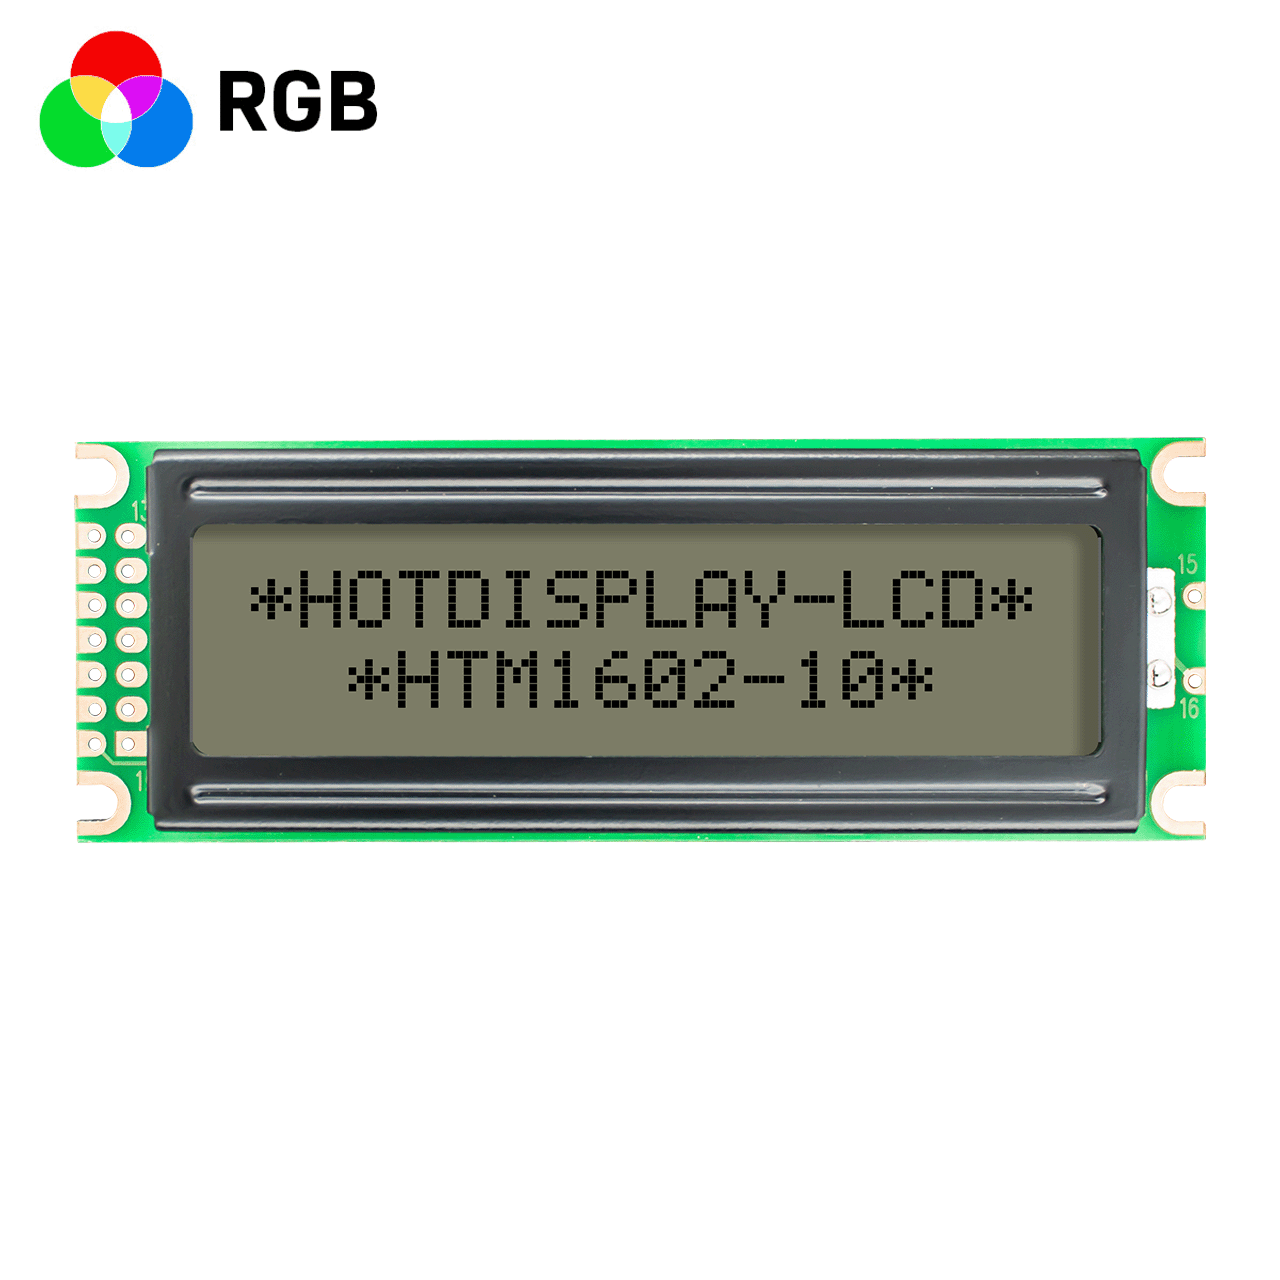 LCD monochrome display 16x2 characters FSTN+ with RGB yellow, green and blue backlight-Arduino